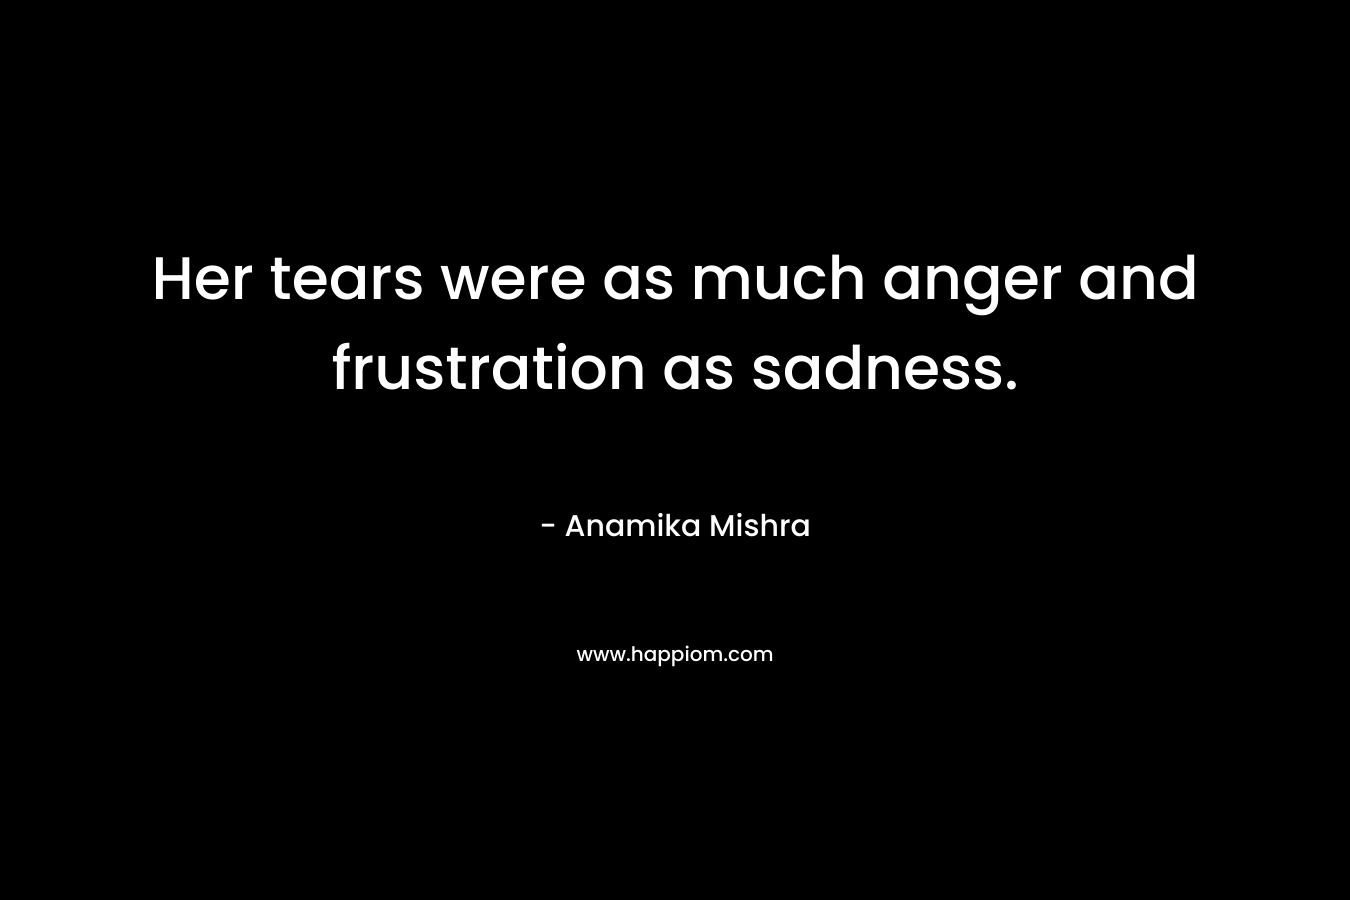 Her tears were as much anger and frustration as sadness.